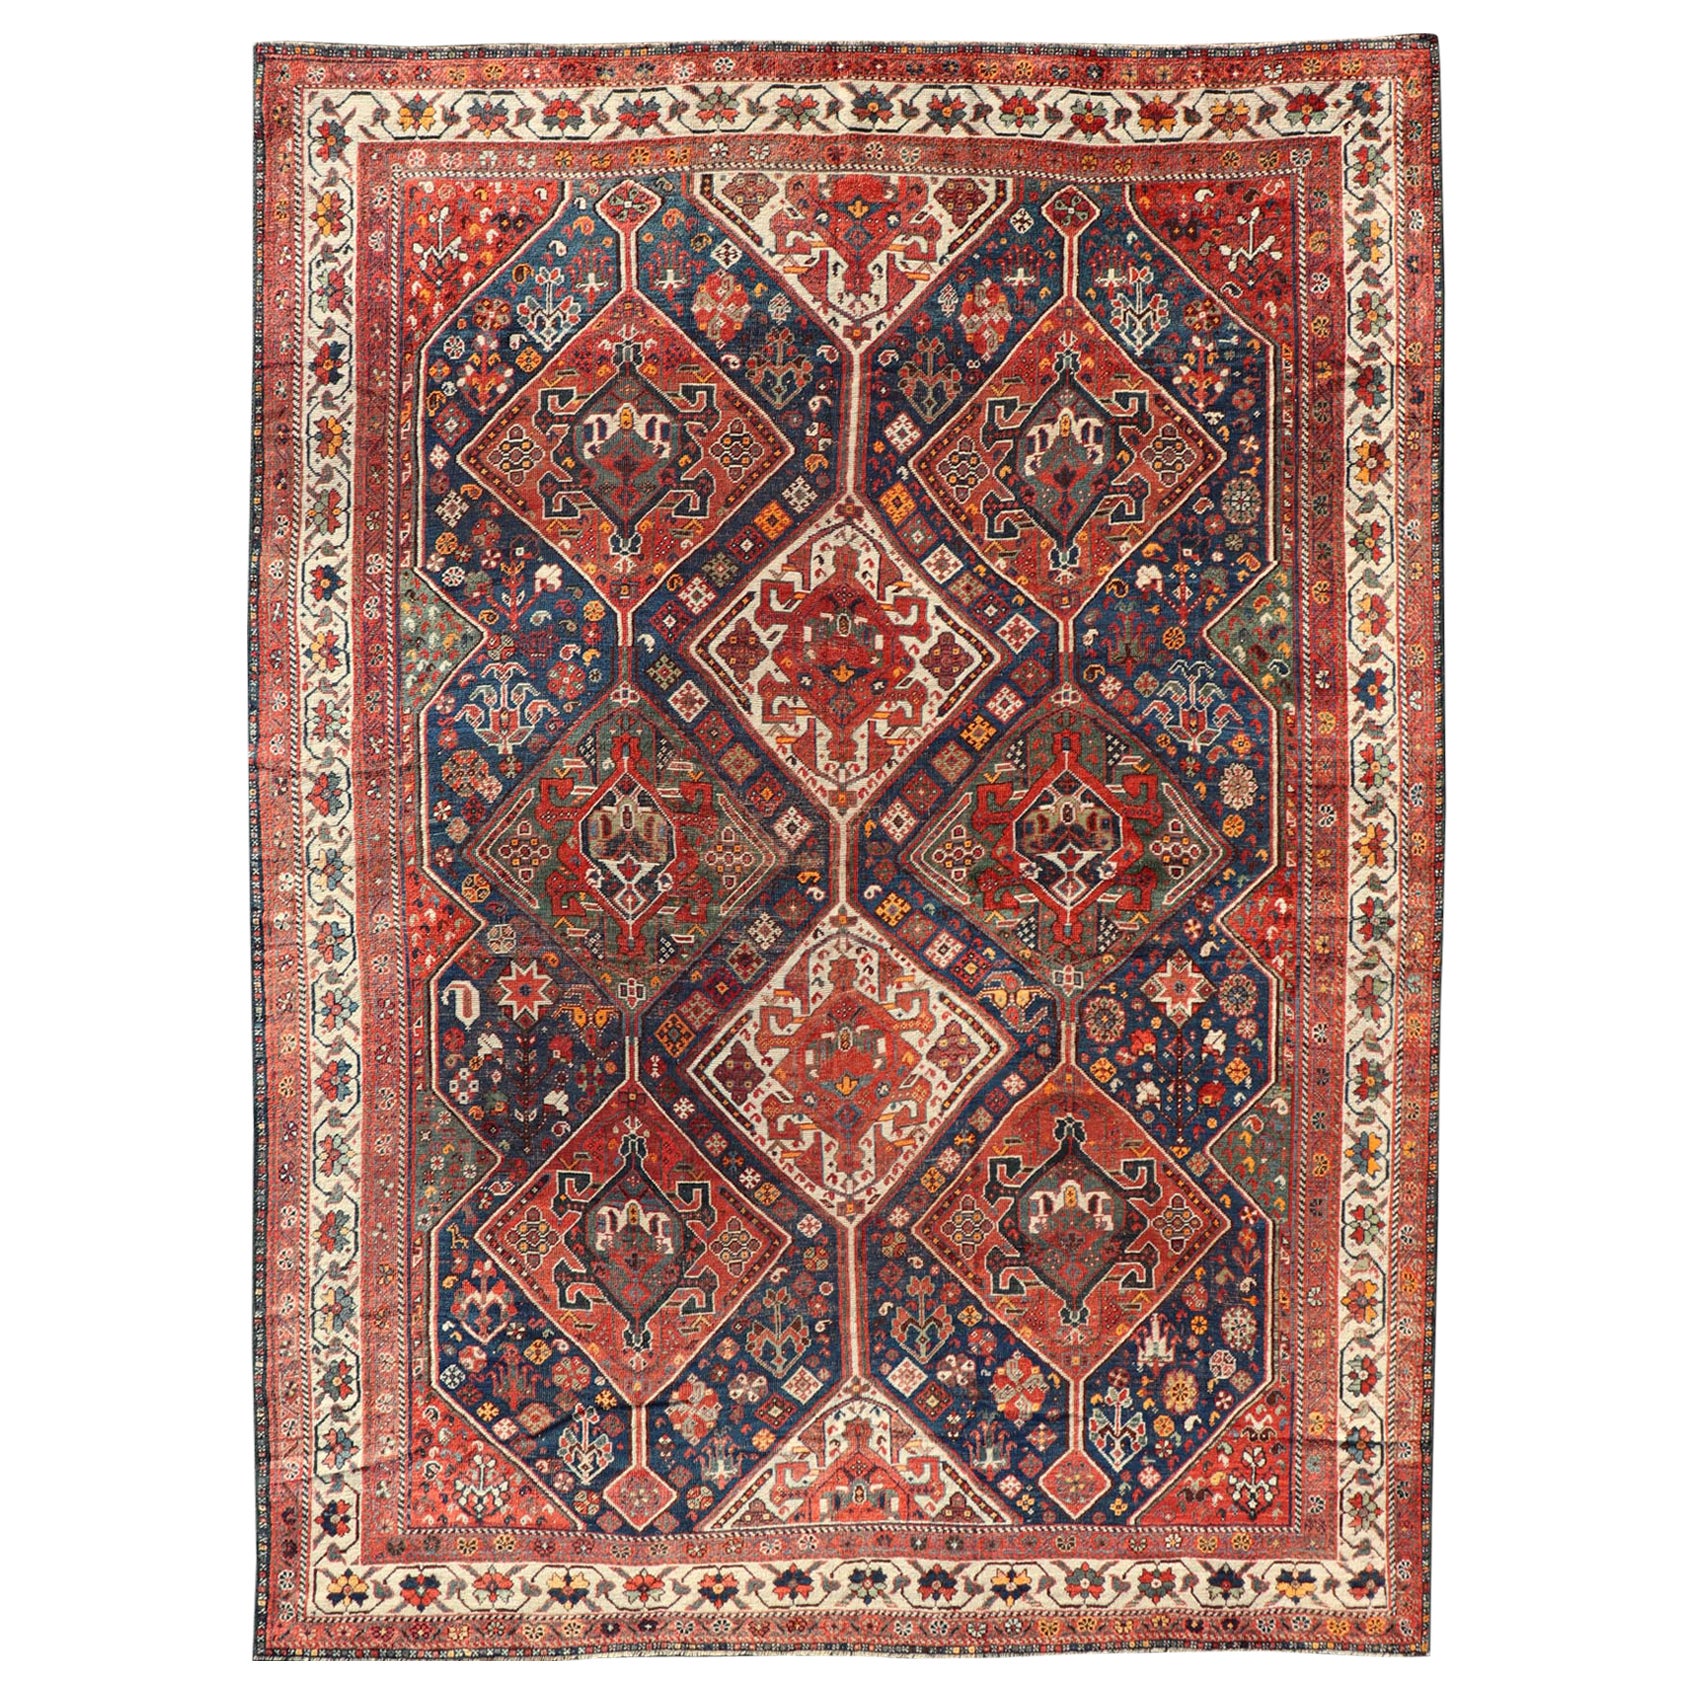 Antique Persian Shiraz Rug with Diamond Medallions in Navy Blue, Red & Ivory